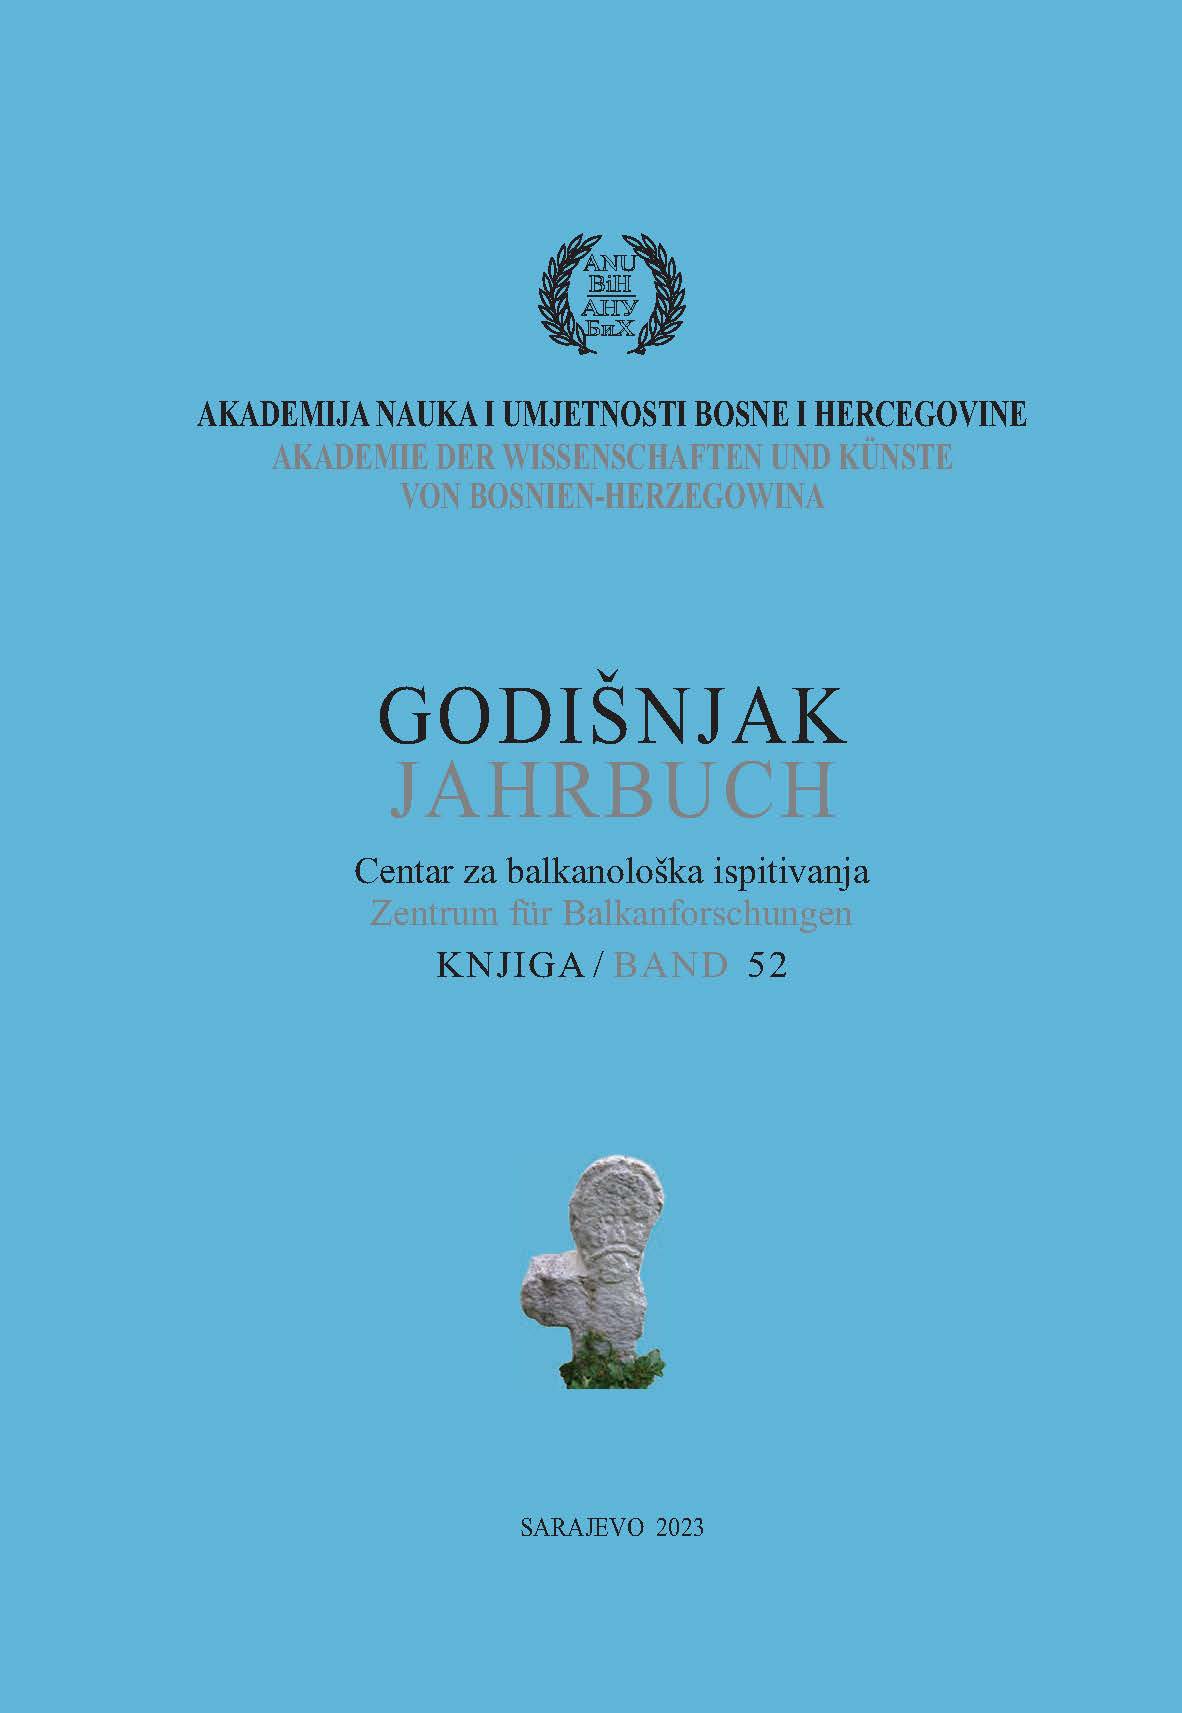 The issue of determining the location of Ecclesia Bestoensis – in support of the knowledge of Early Christianity in Bosnia and Herzegovina Cover Image